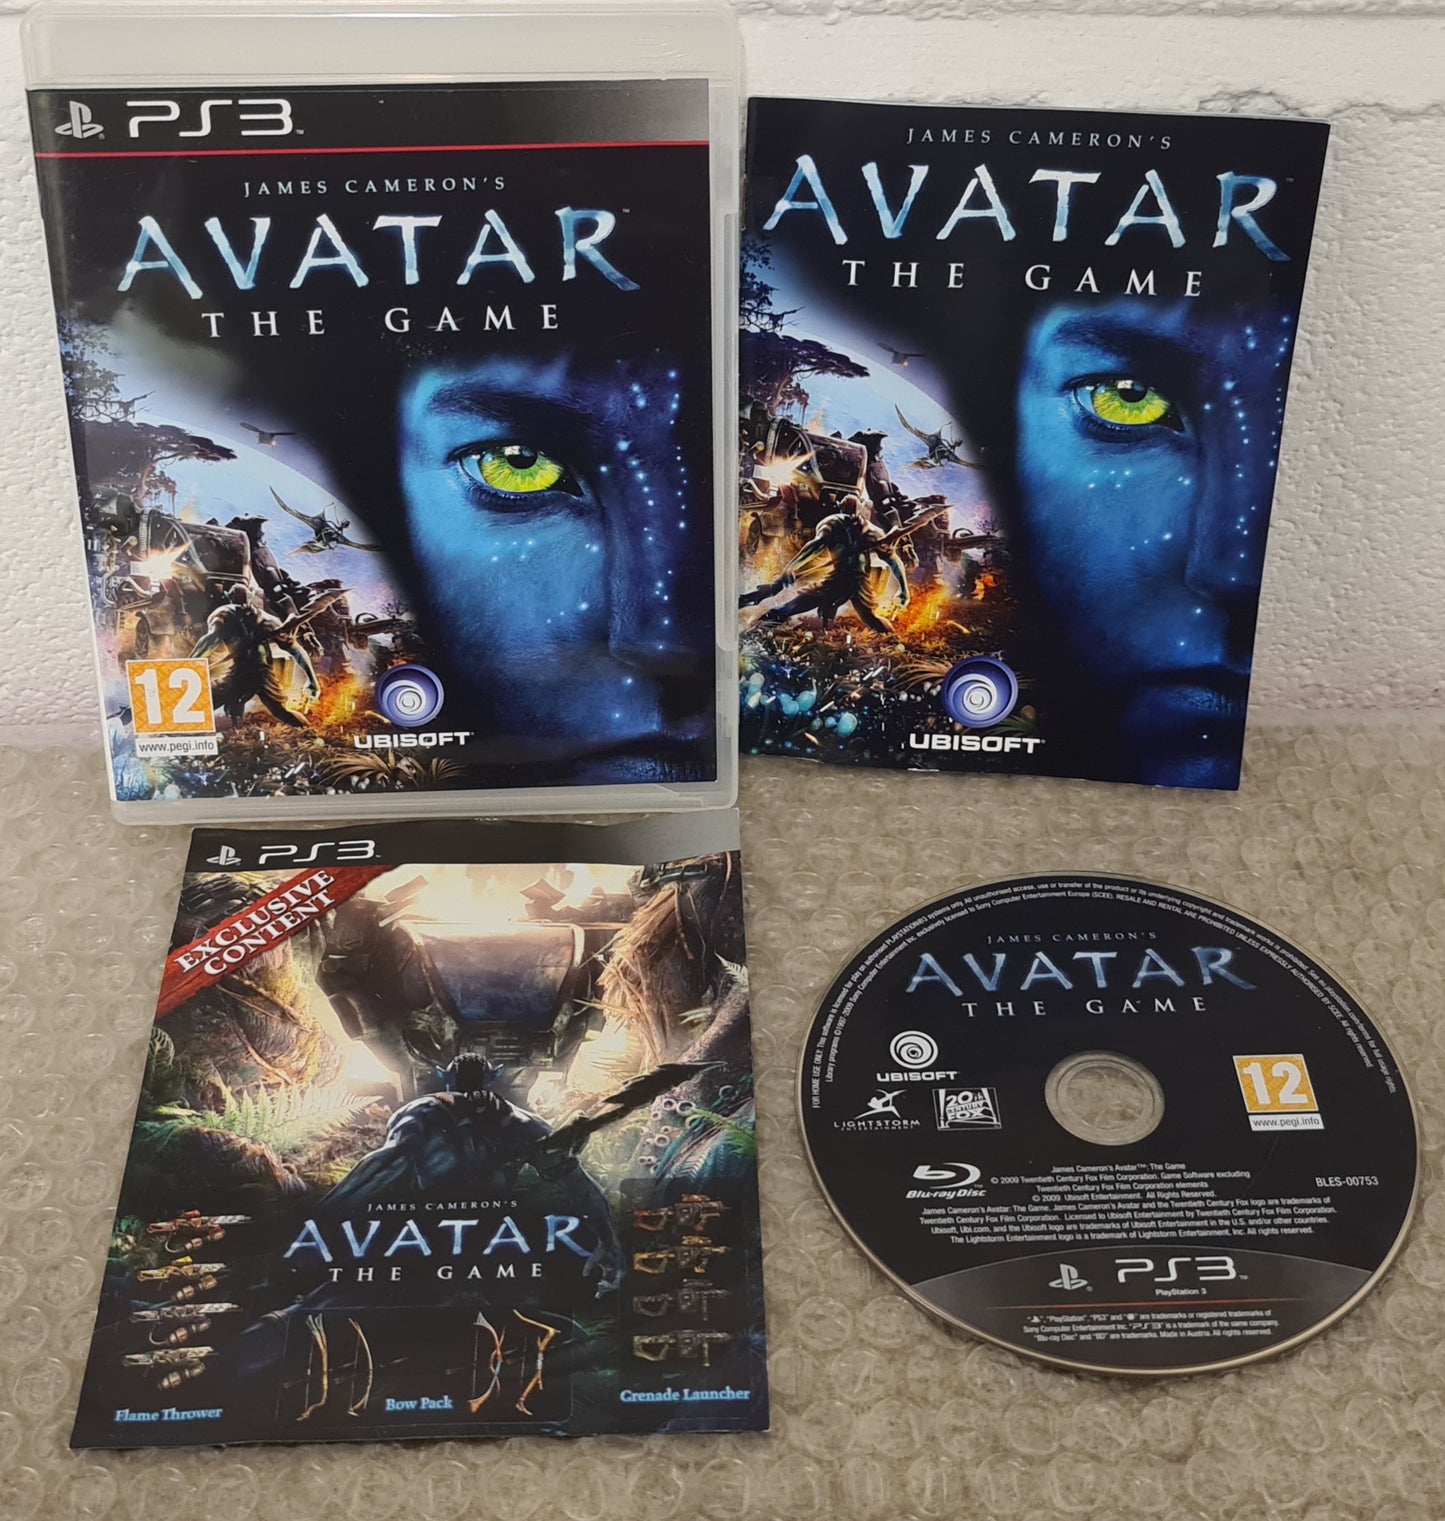 Avatar with Manual Sony Playstation 3 (PS3) Game